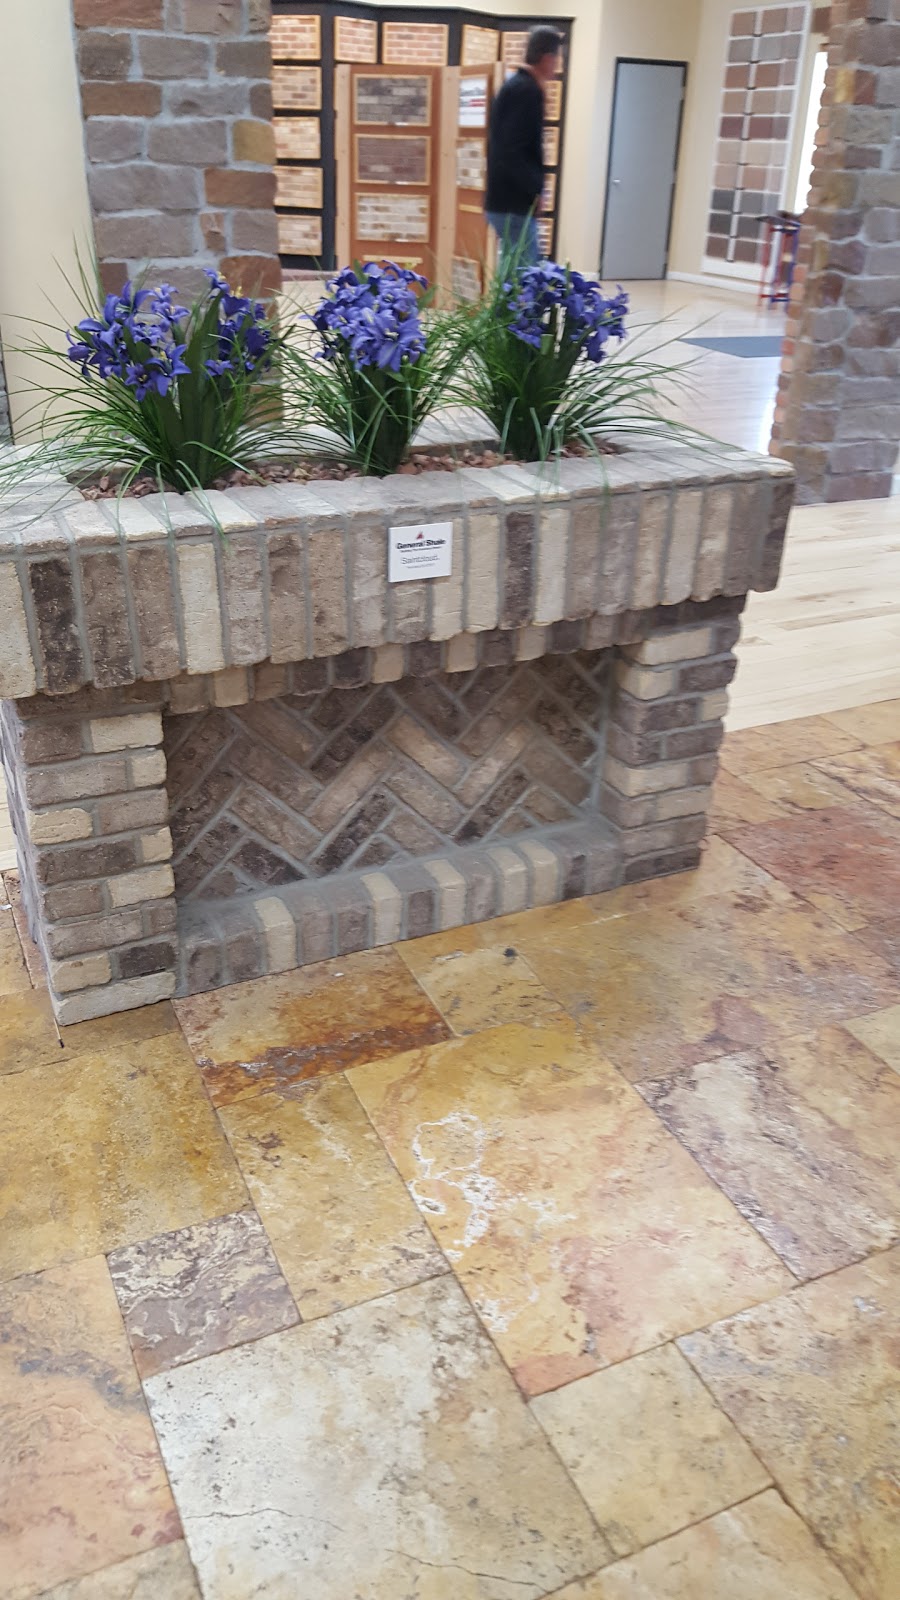 General Shale Brick | 1845 W Dartmouth Ave, Englewood, CO 80110, USA | Phone: (303) 783-3000